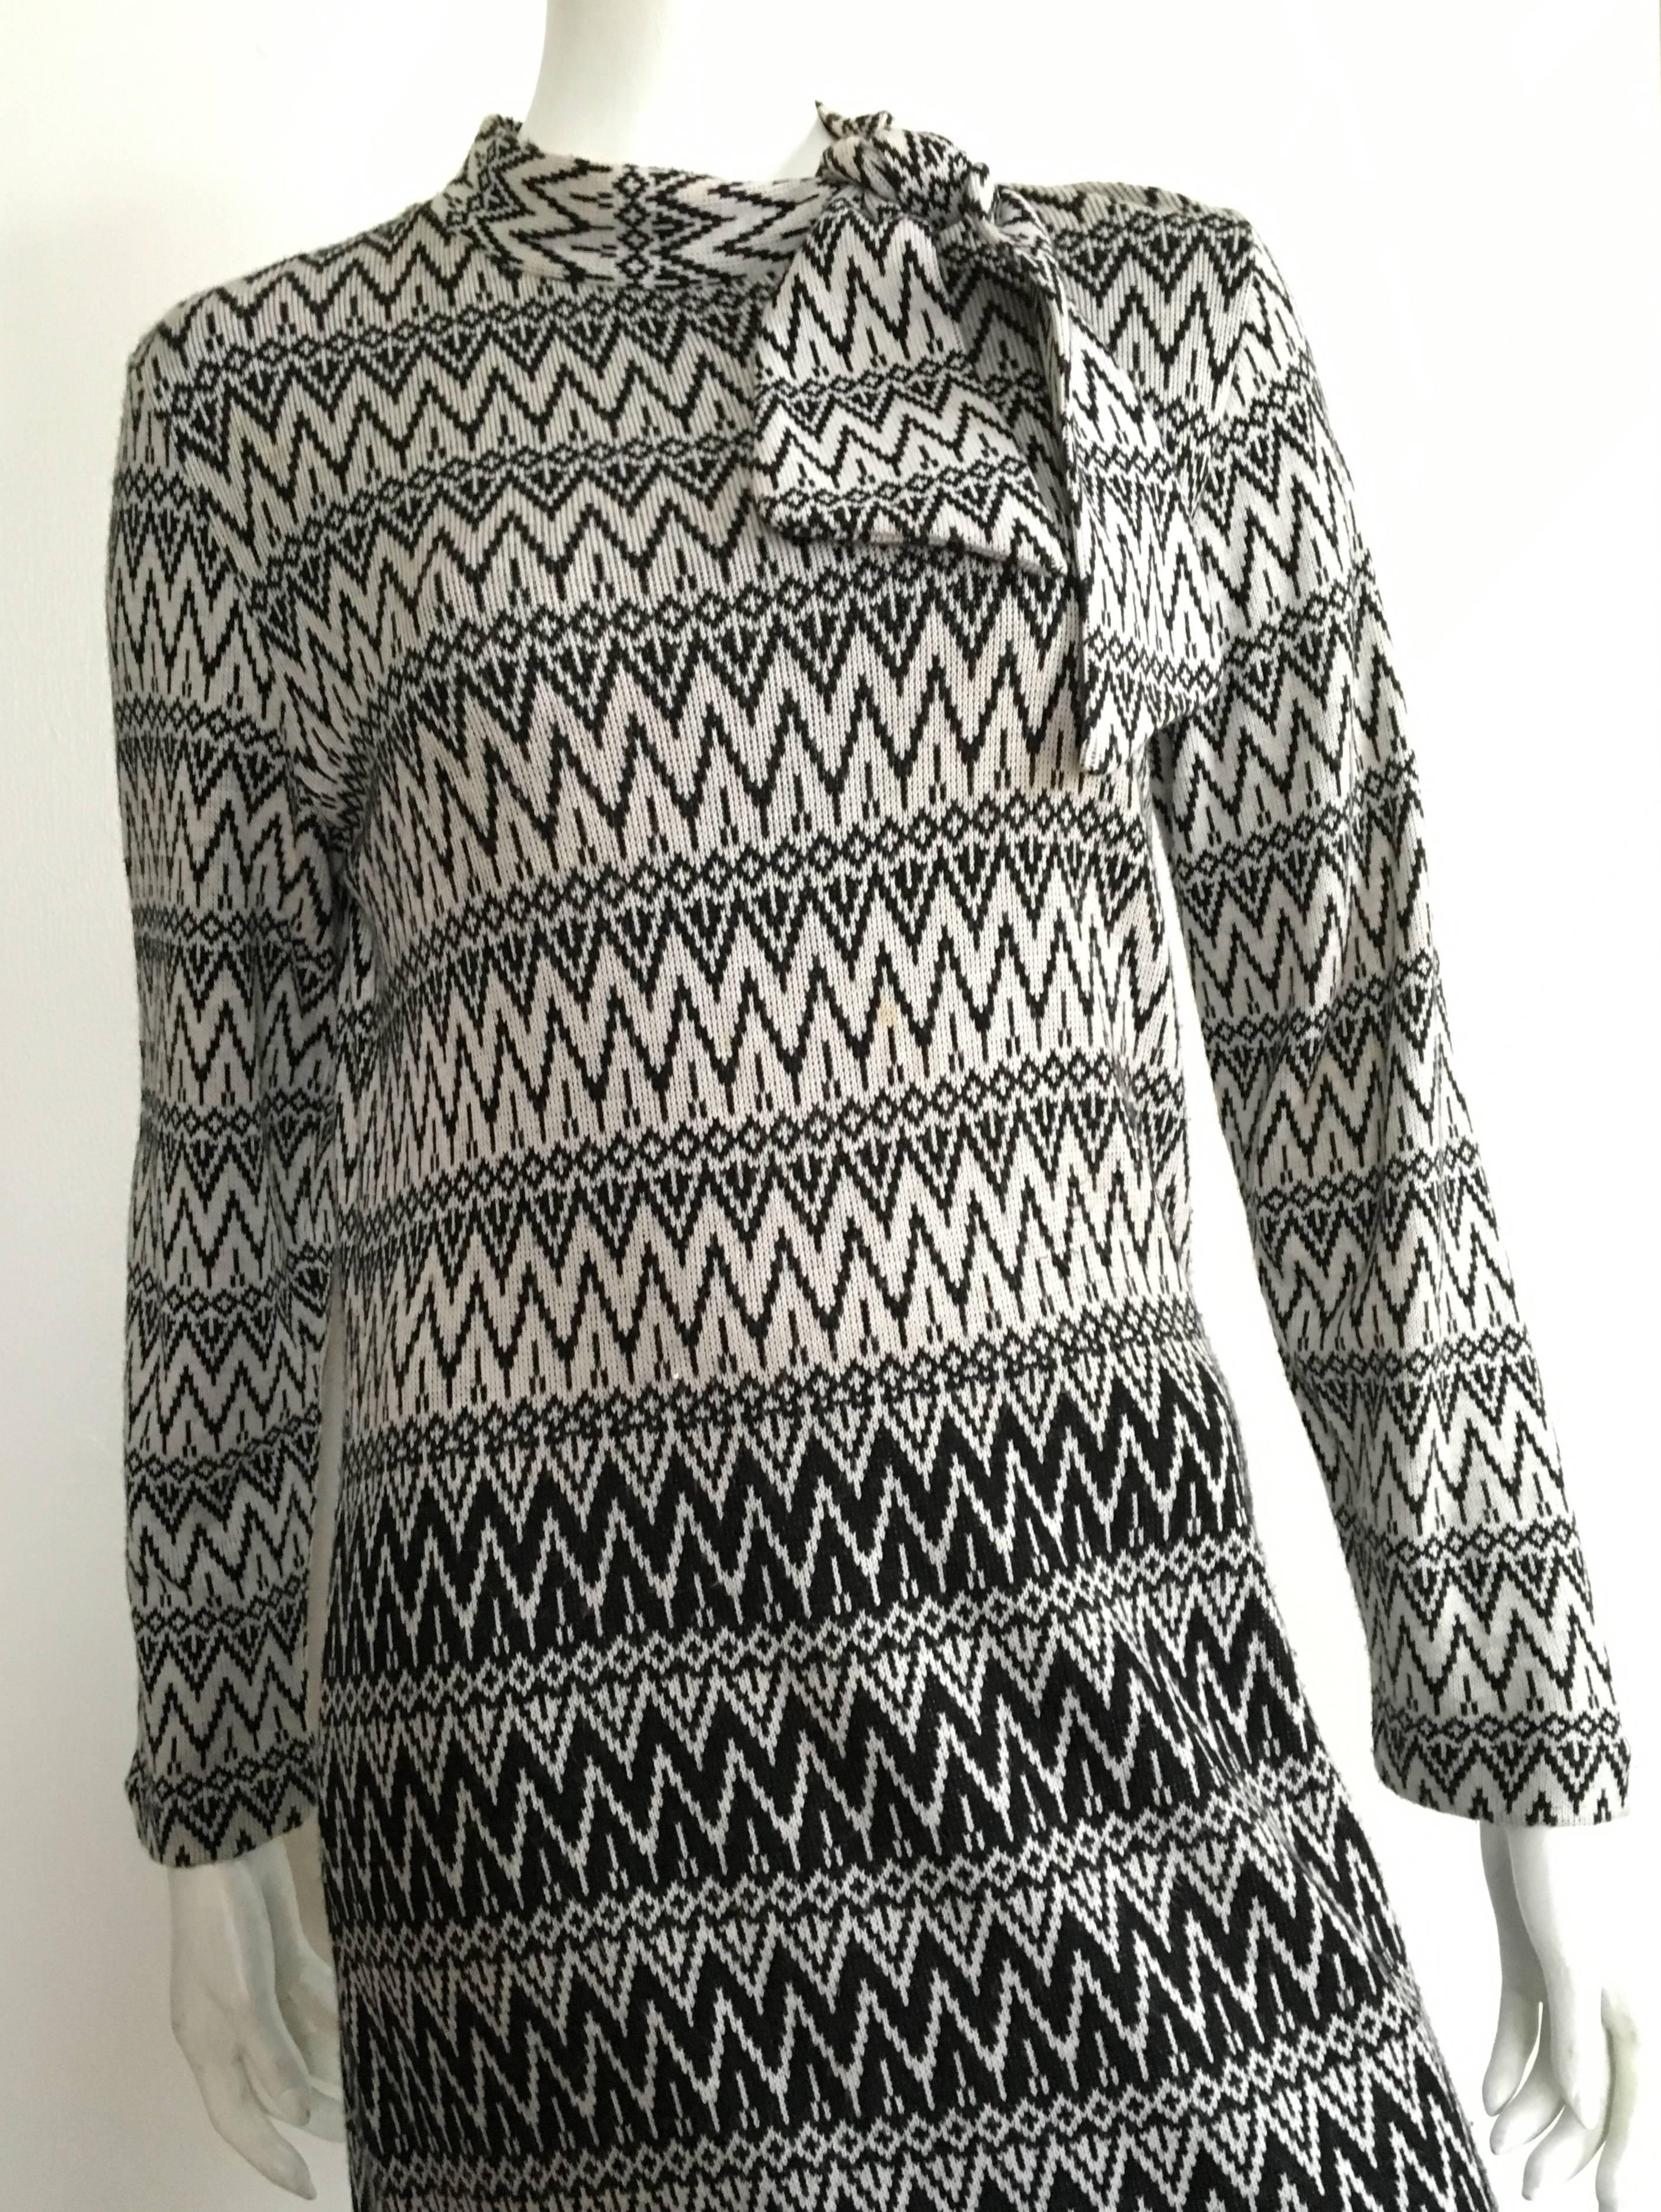 Susan Small 1970s casual chevron pattern long acrylic knit maxi dress is a vintage size 14 but fits like a modern USA size 6 / 8.  Please see & use the measurements listed below so you can properly measure your lovely body to make certain that this